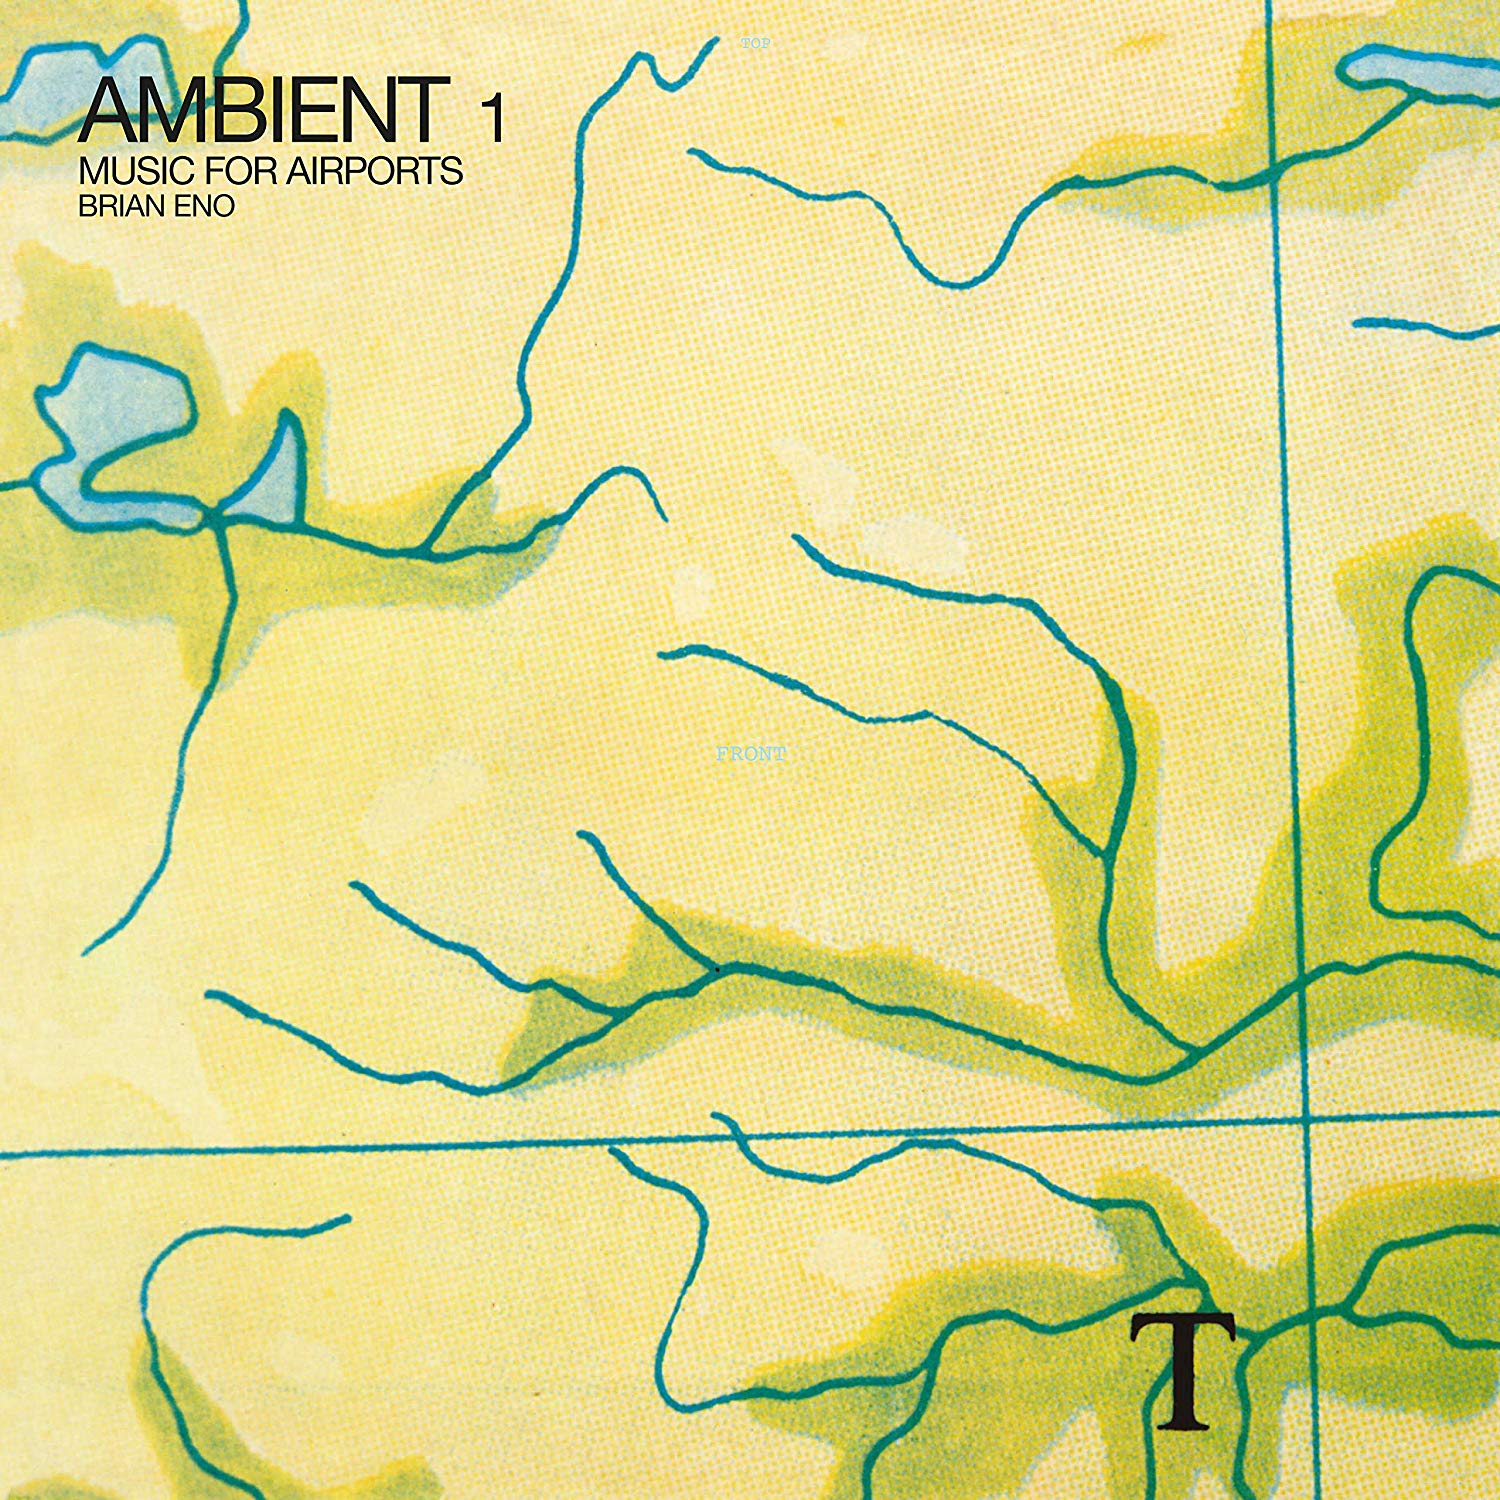 CD Shop - ENO, BRIAN AMBIENT 1: MUSIC FOR AIRPORTS